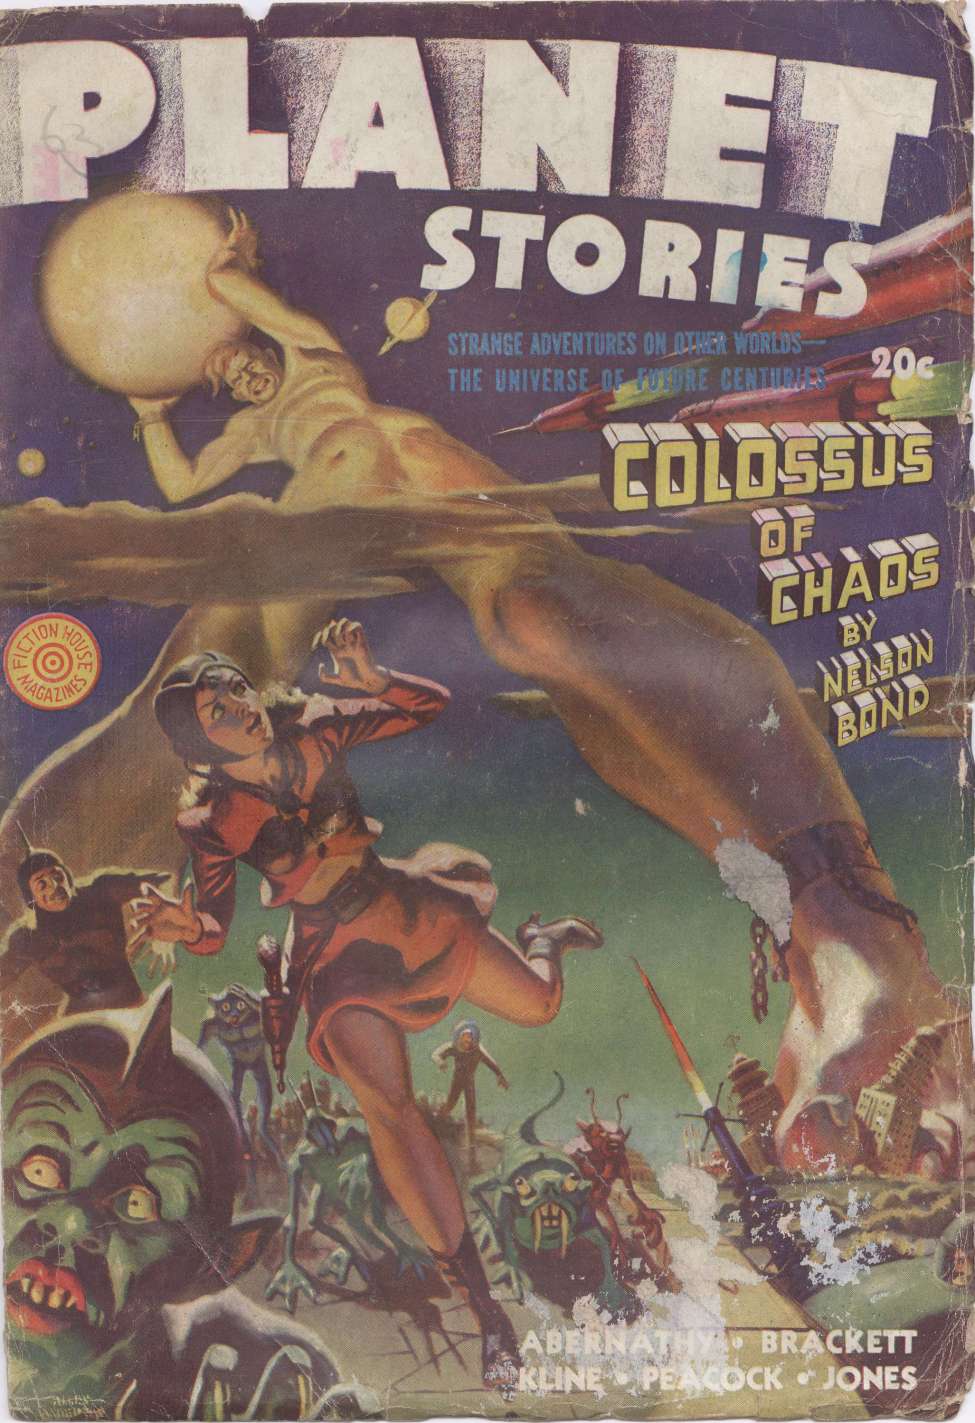 Comic Book Cover For Planet Stories v2 1 - Colossus of Chaos - Nelson S. Bond